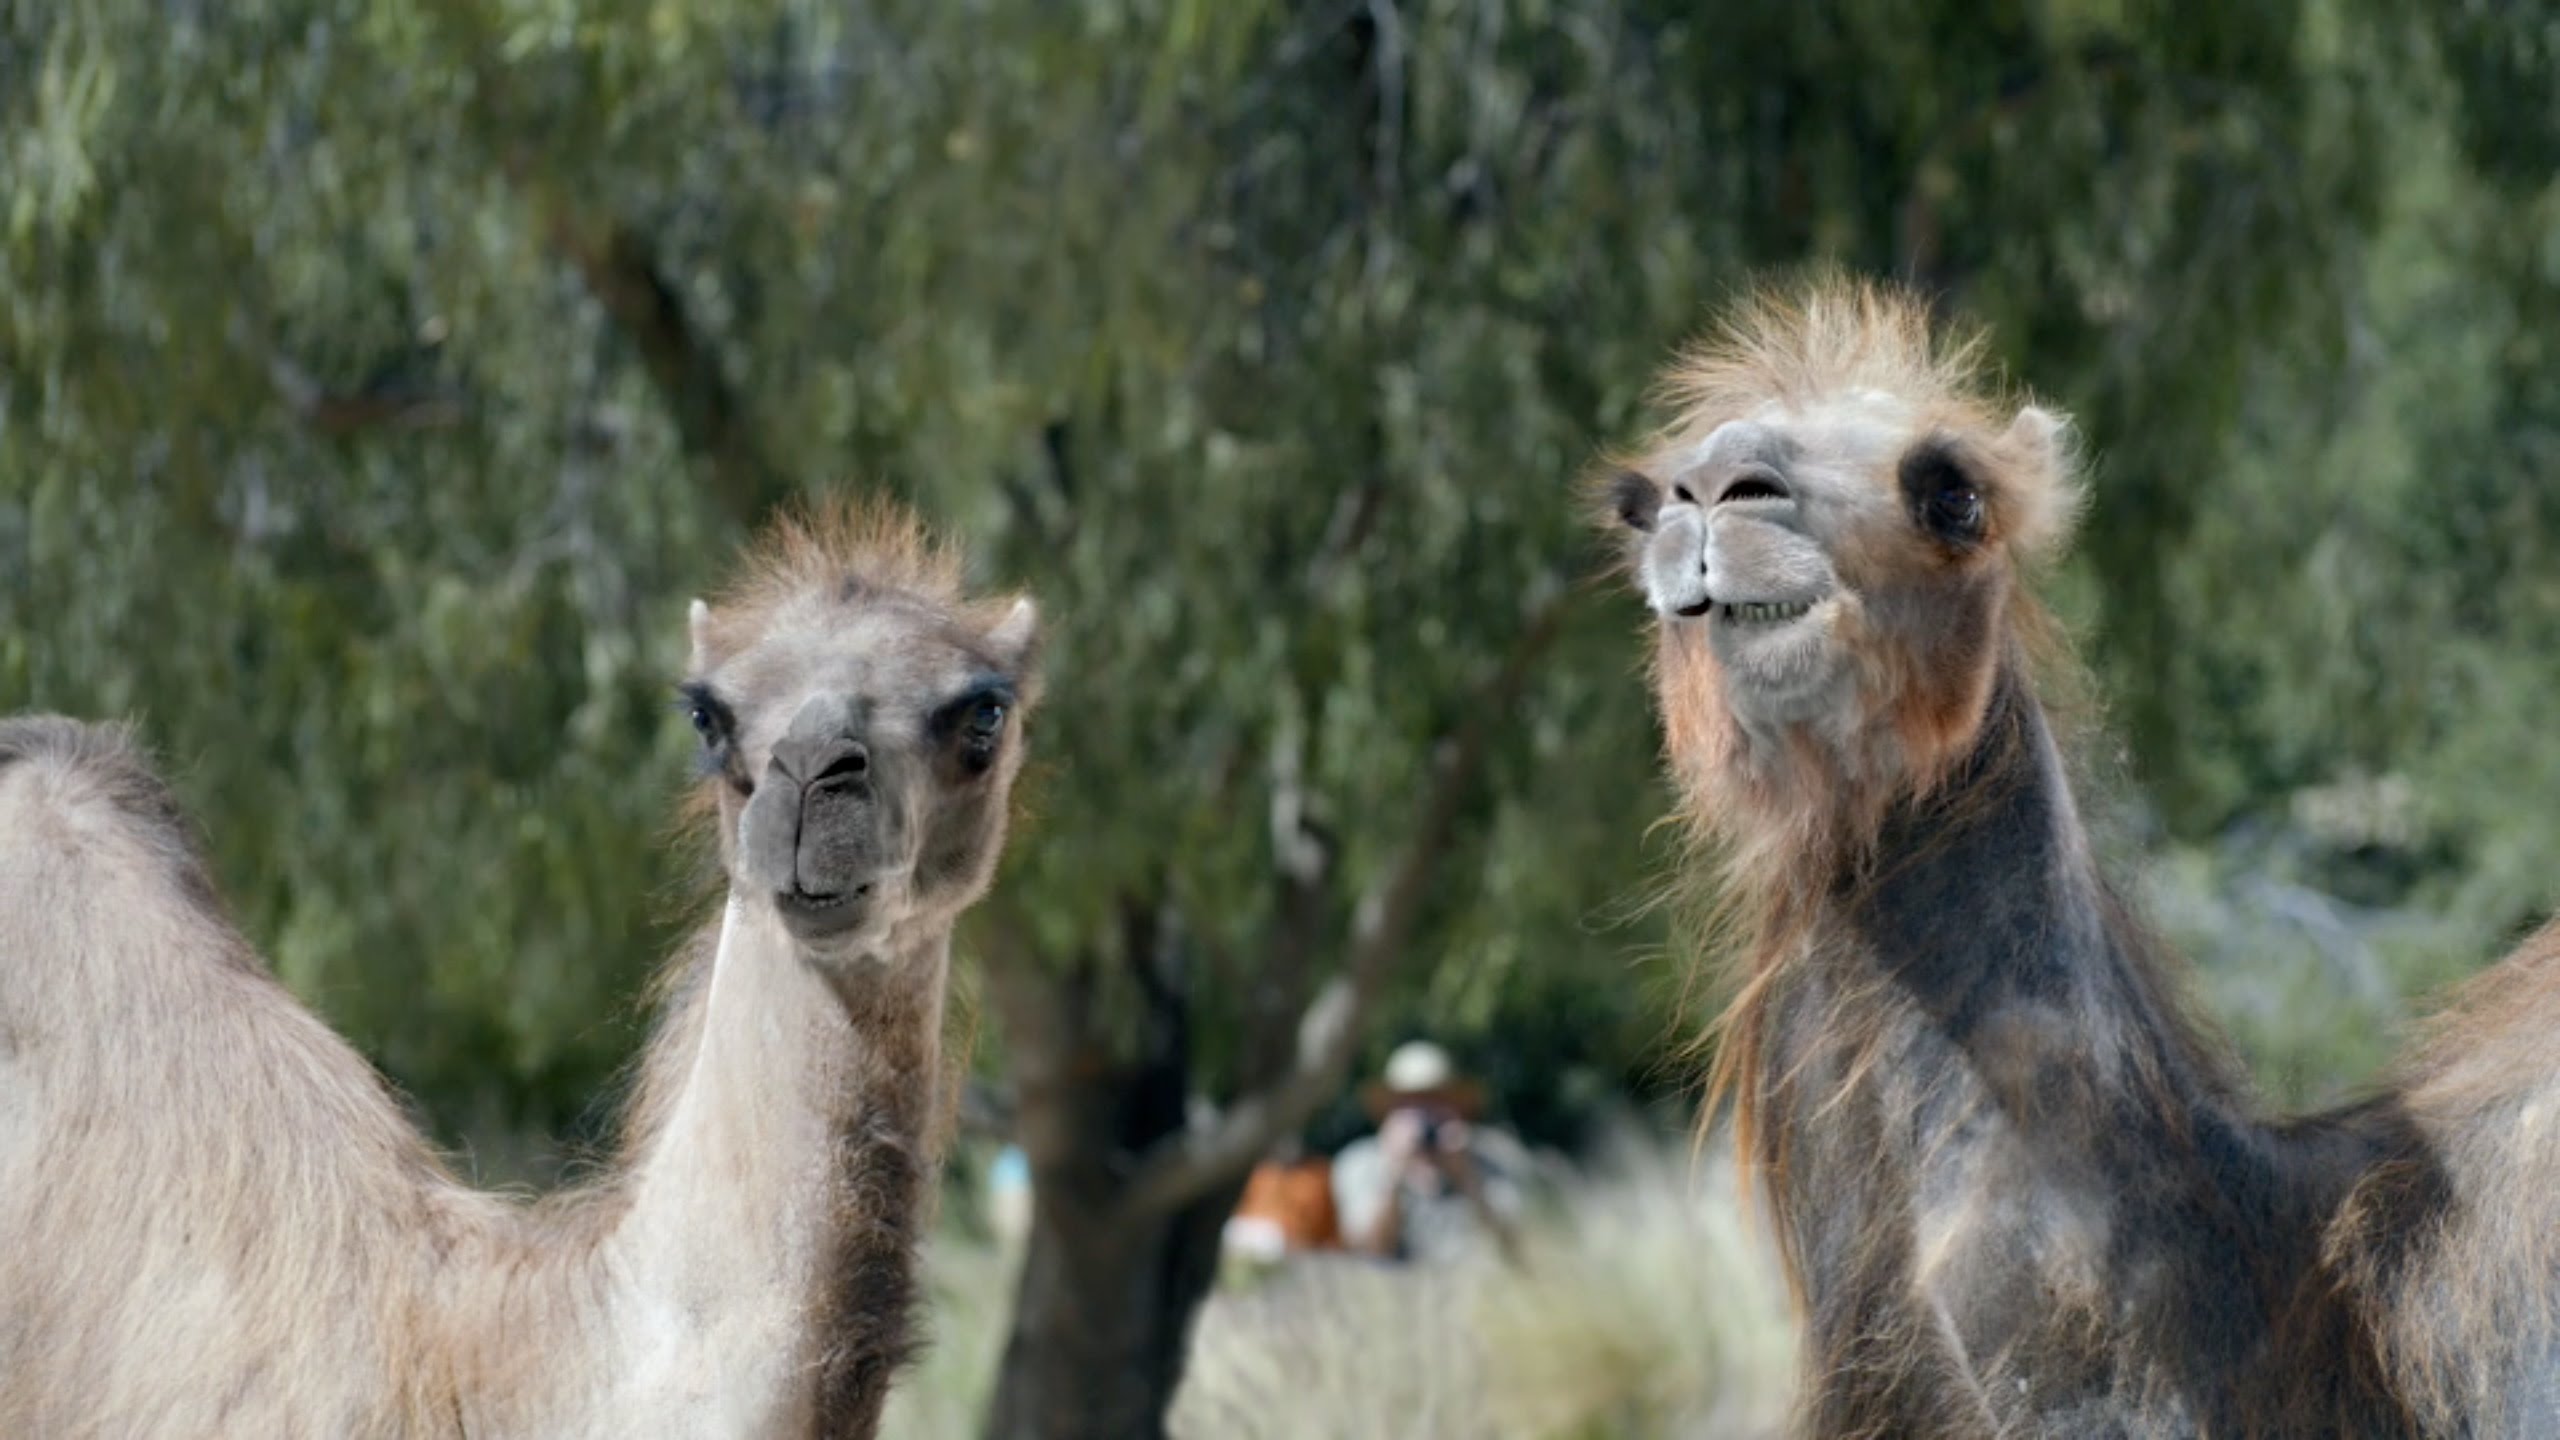 Ad of the Day: It's Hump Day All Over Again in Geico's New Commer...